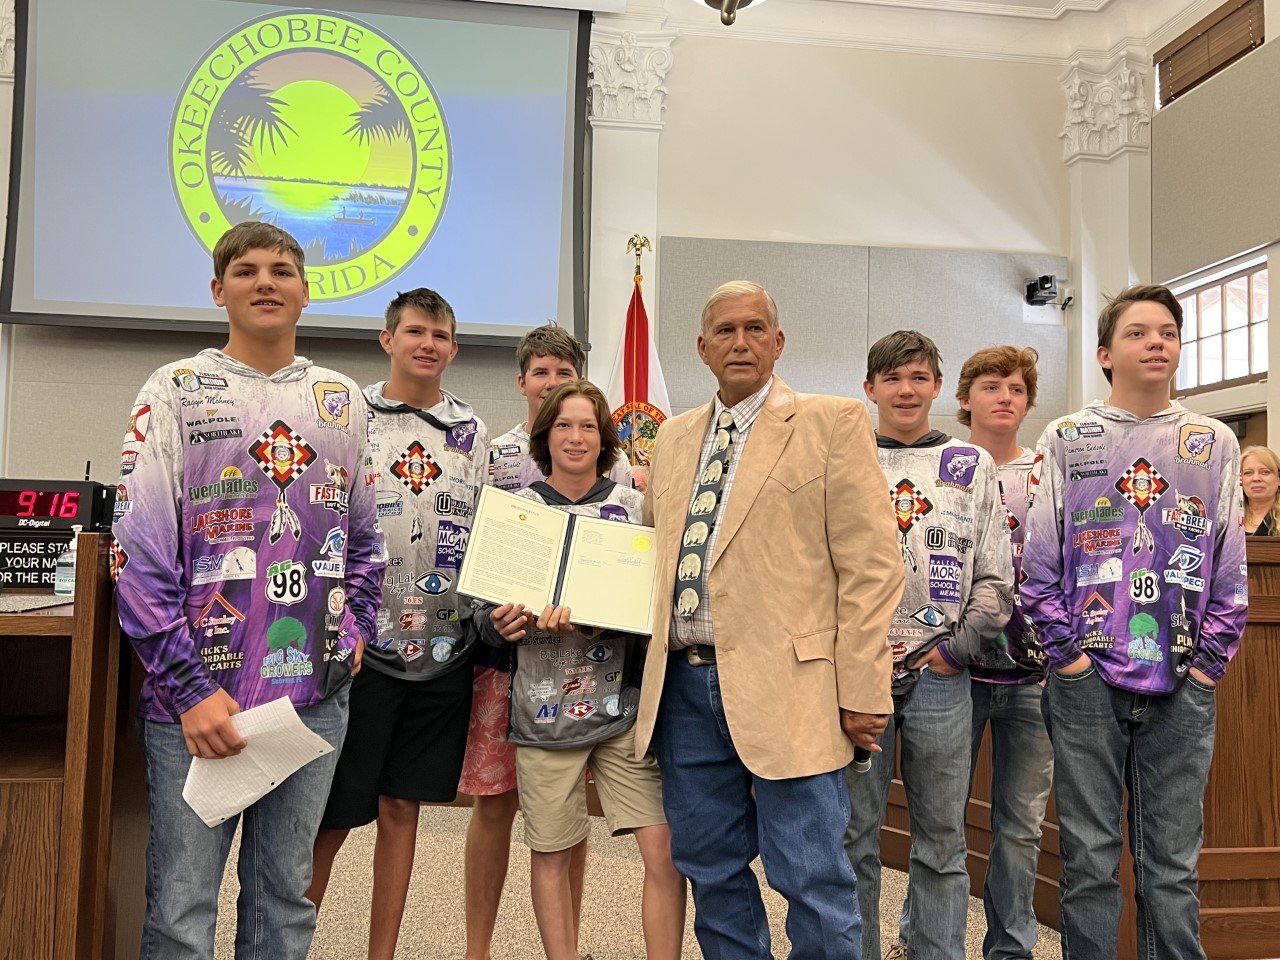 OKEECHOBEE -- The Okeechobee County Commission honored the Okeechobee High School Bass Club during the March 9 commission meeting in the Historic Okeechobee County Courthouse .